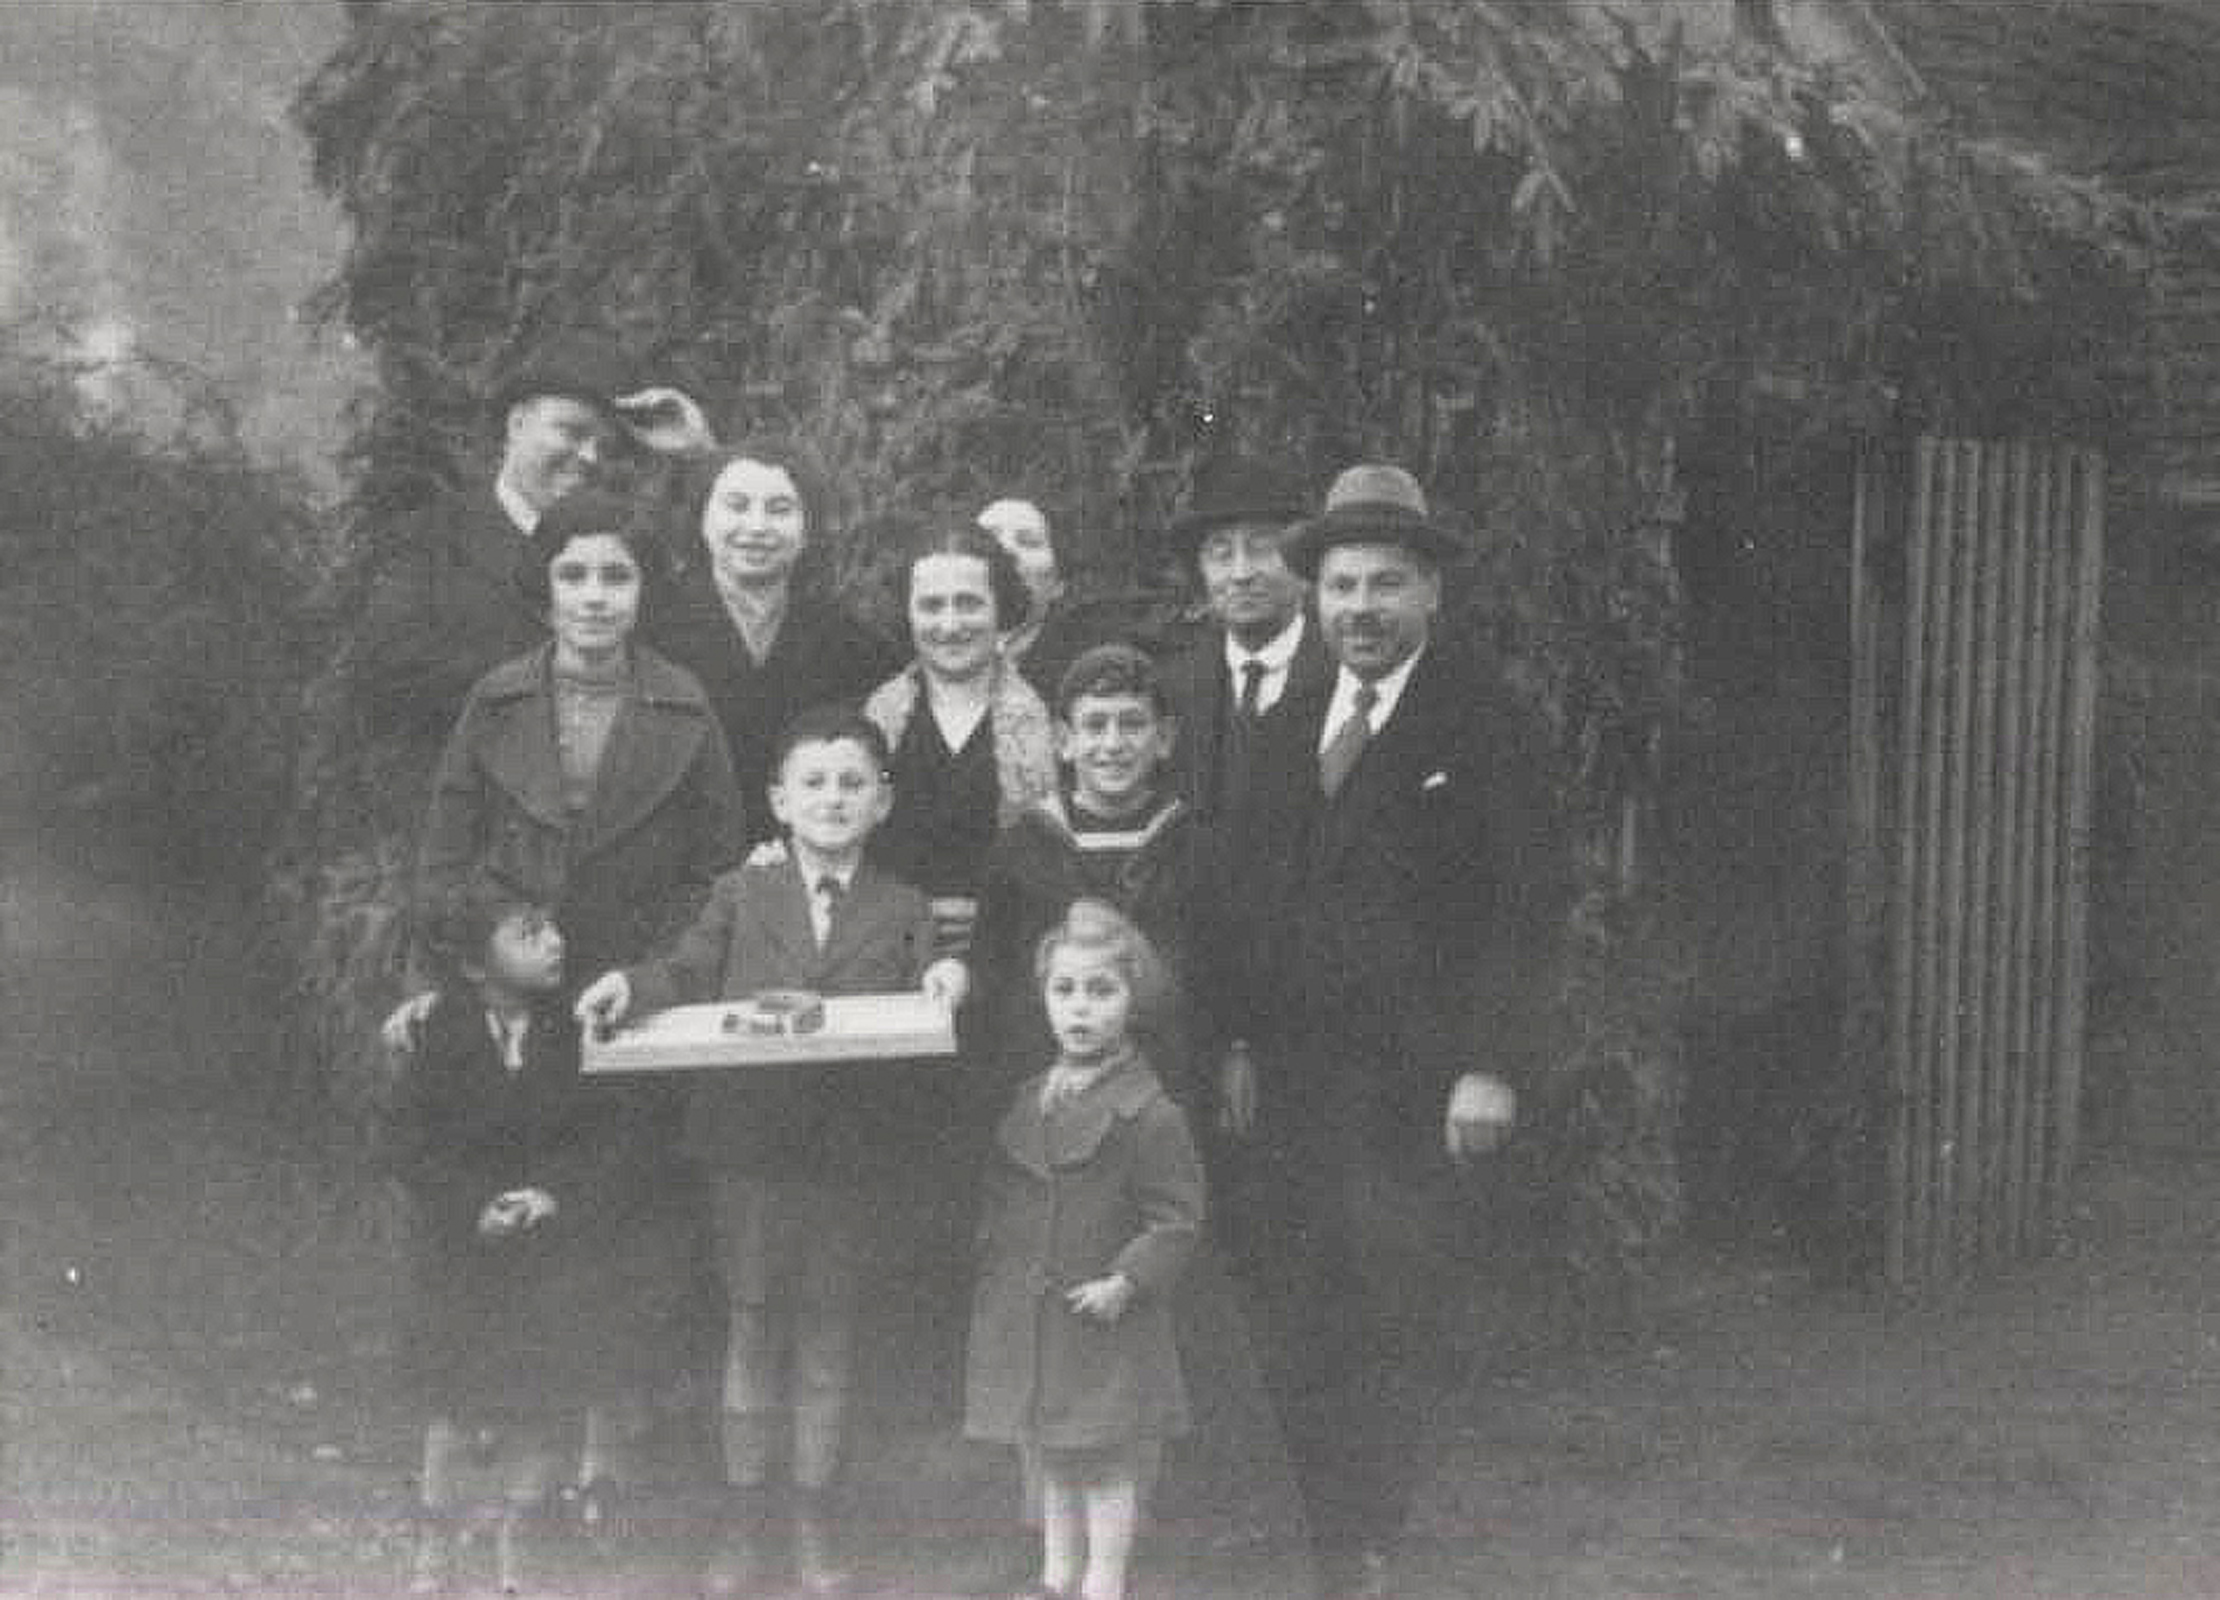 The family on Sukkot in Kippenheim, in front of a leaf hut. Inge in front, on the left.